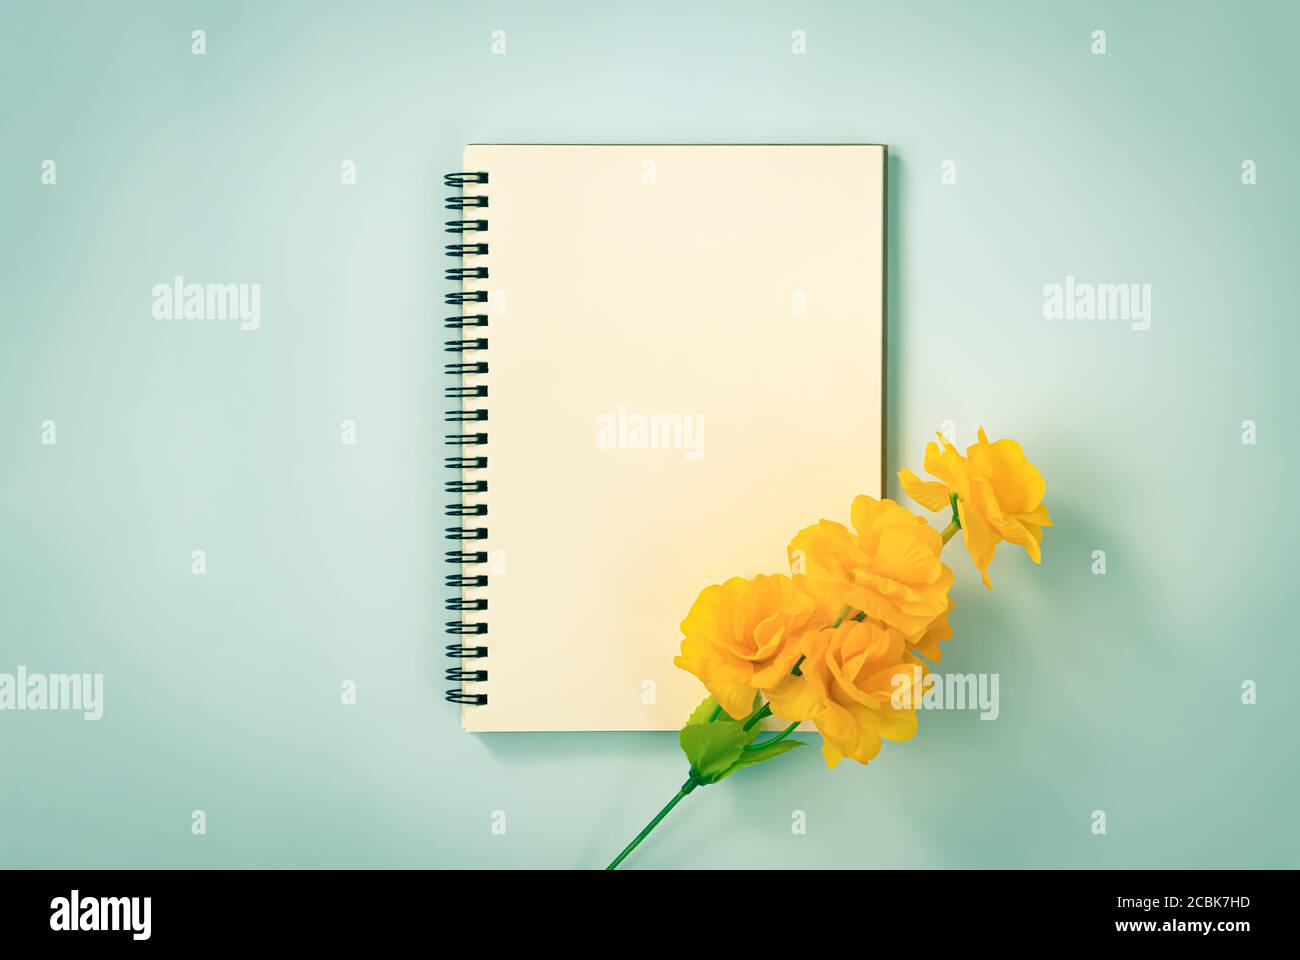 Spiral Notebook or Spring Notebook in Unlined Type and Orange Yellow Flowers at Bottom Right on Blue Pastel Minimalist Background. Spiral Notebook Moc Stock Photo